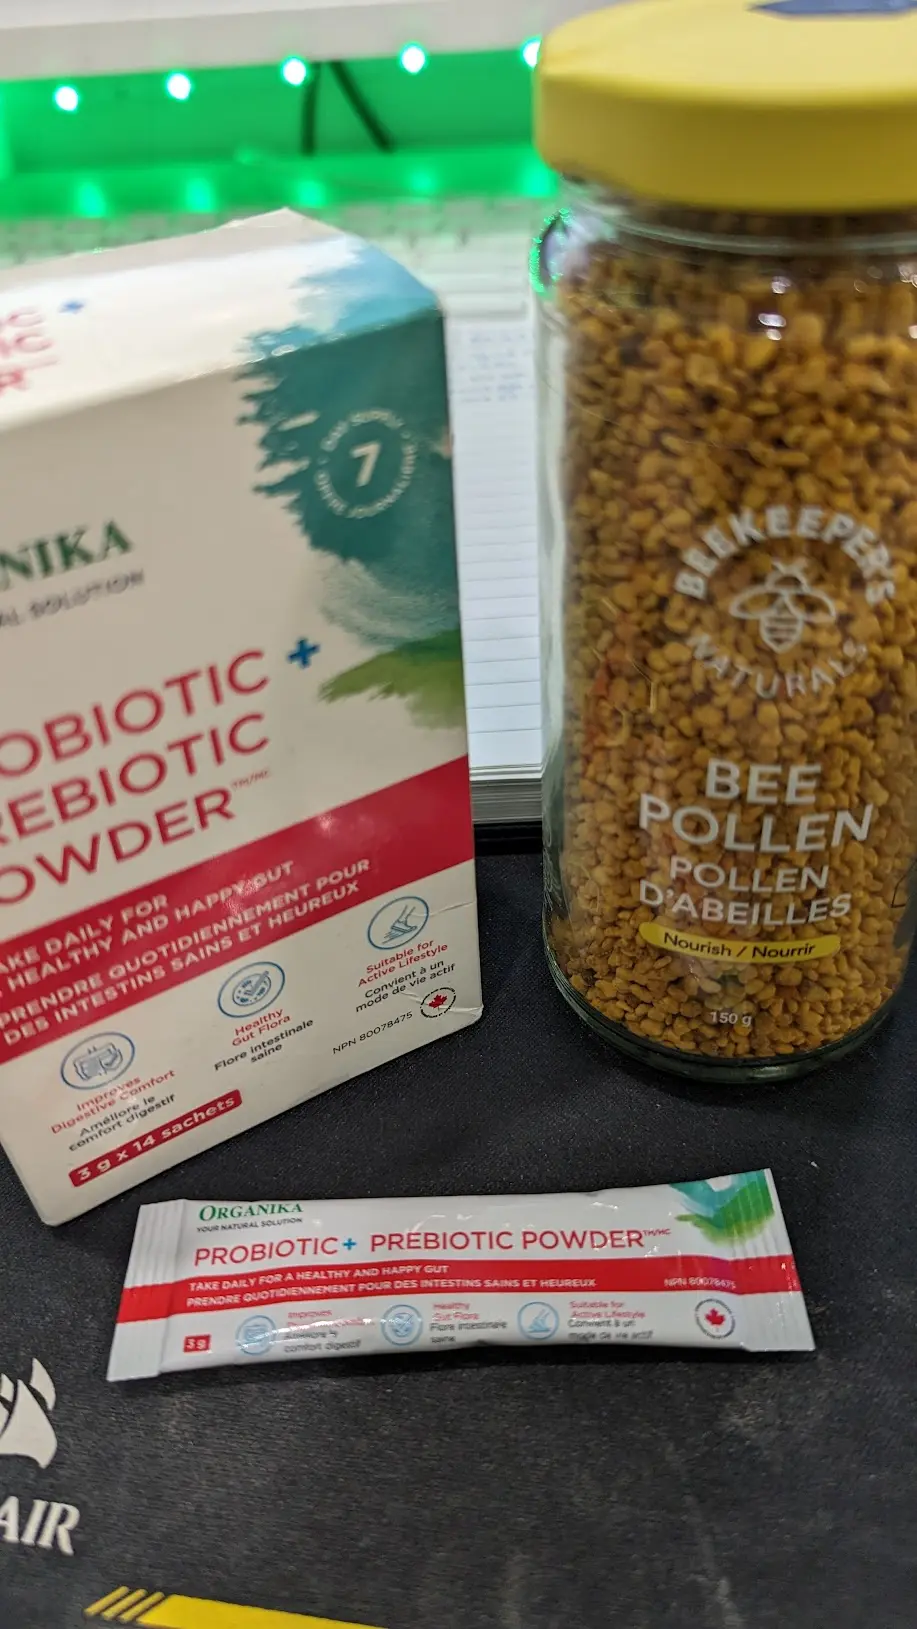 dry fasting refeeding probiotics and bee pollen